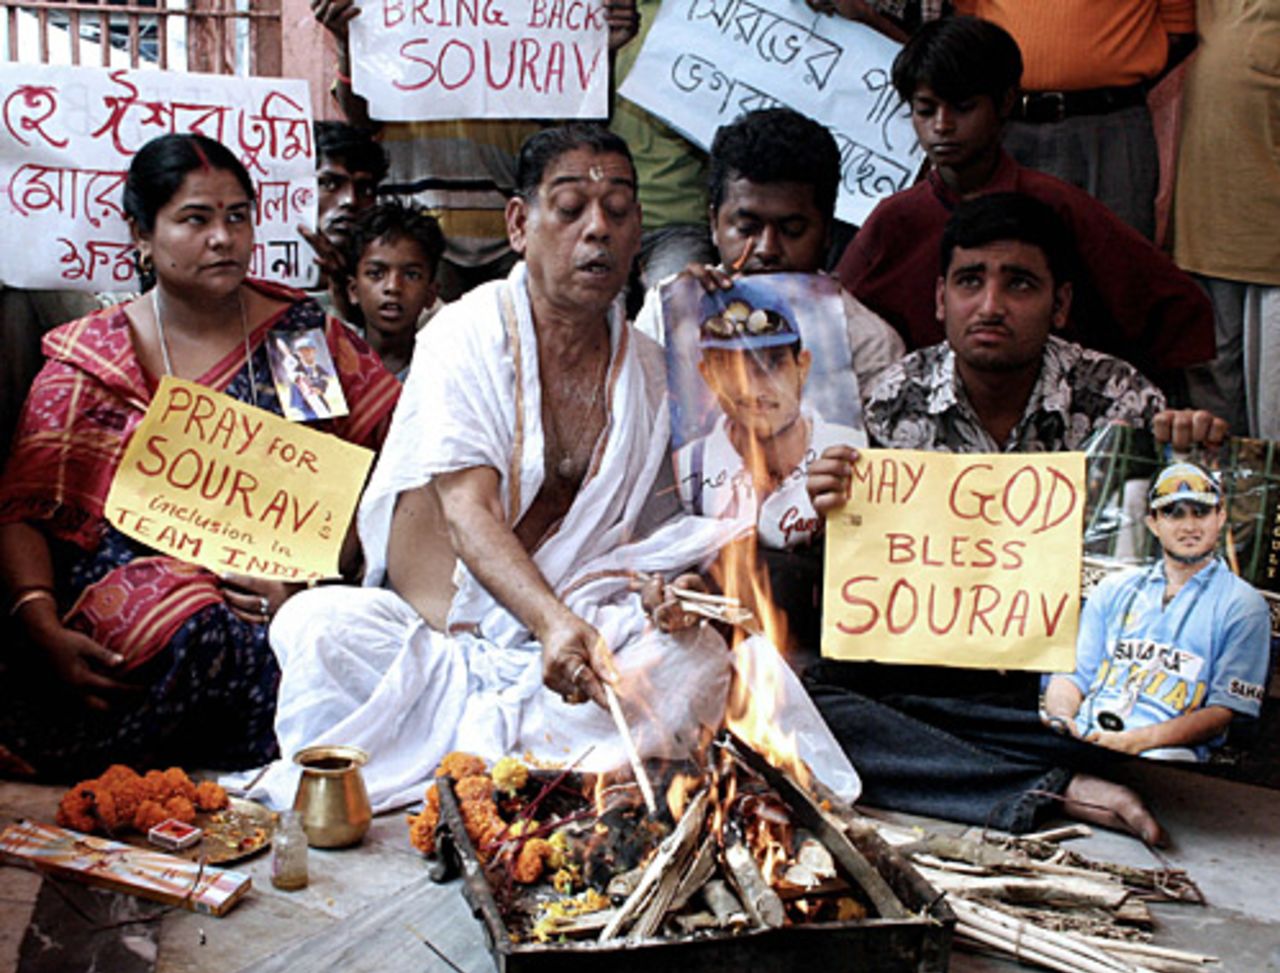 A Hindu priest prays Sourav Ganguly will return to the Indian squad, Ahmedabad, December 17, 2005